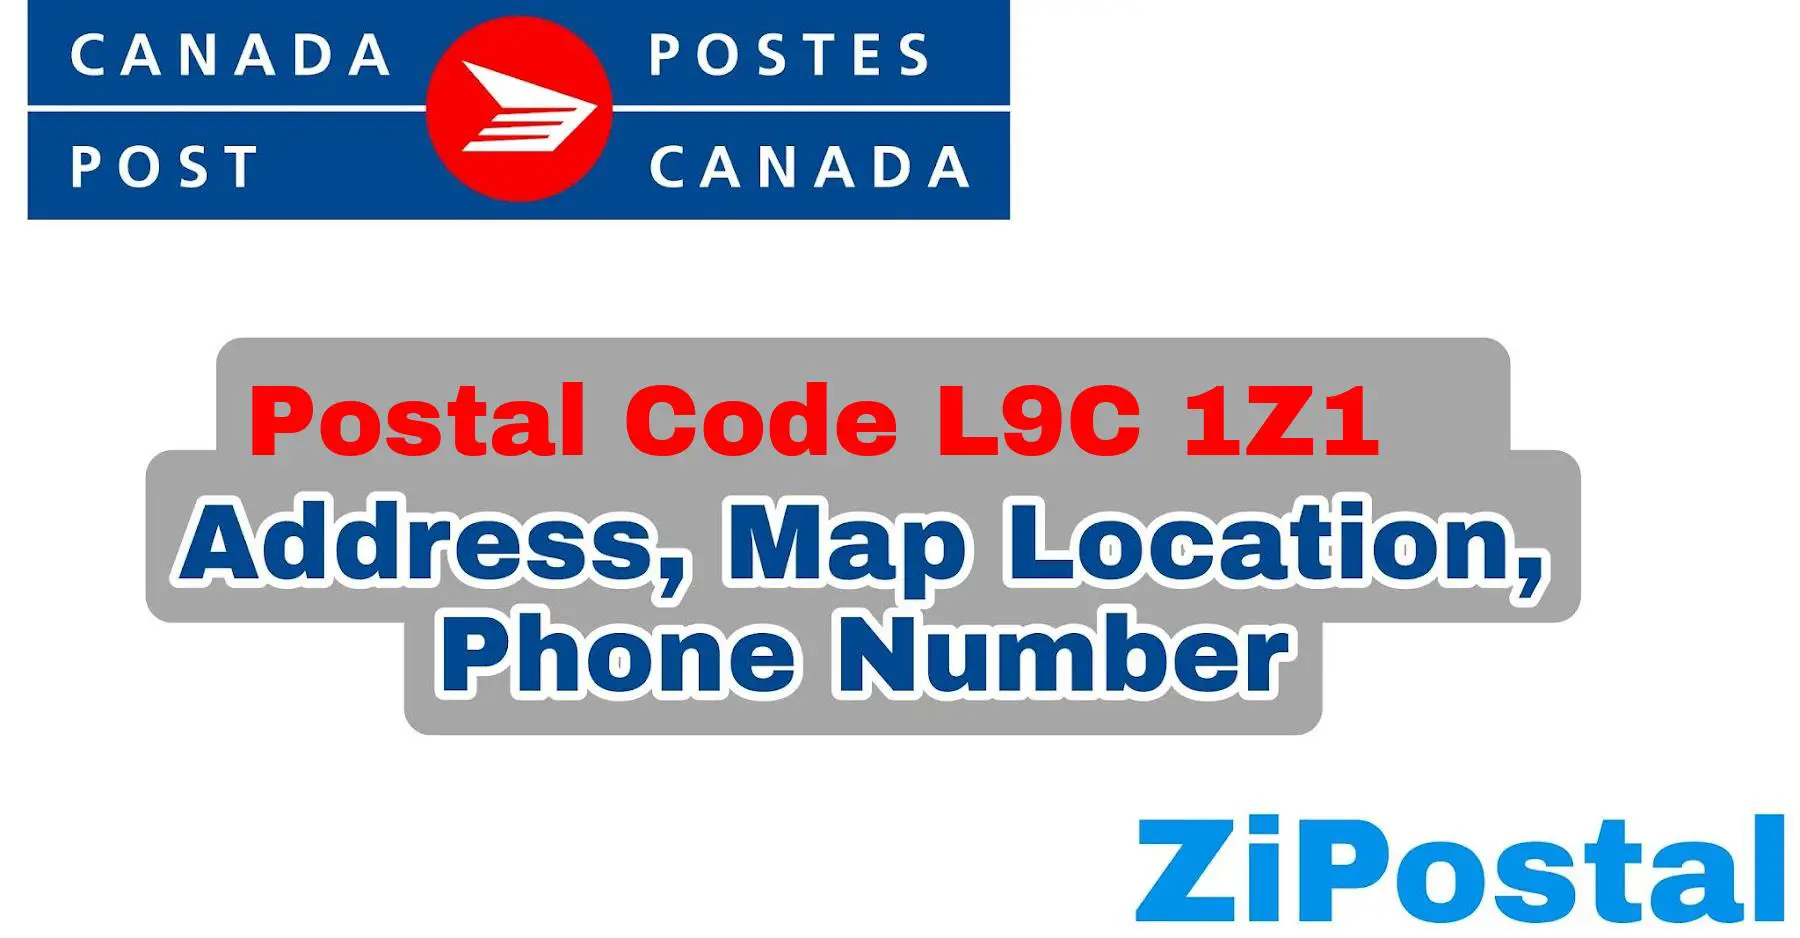 Postal Code L9C 1Z1 Address Map Location and Phone Number